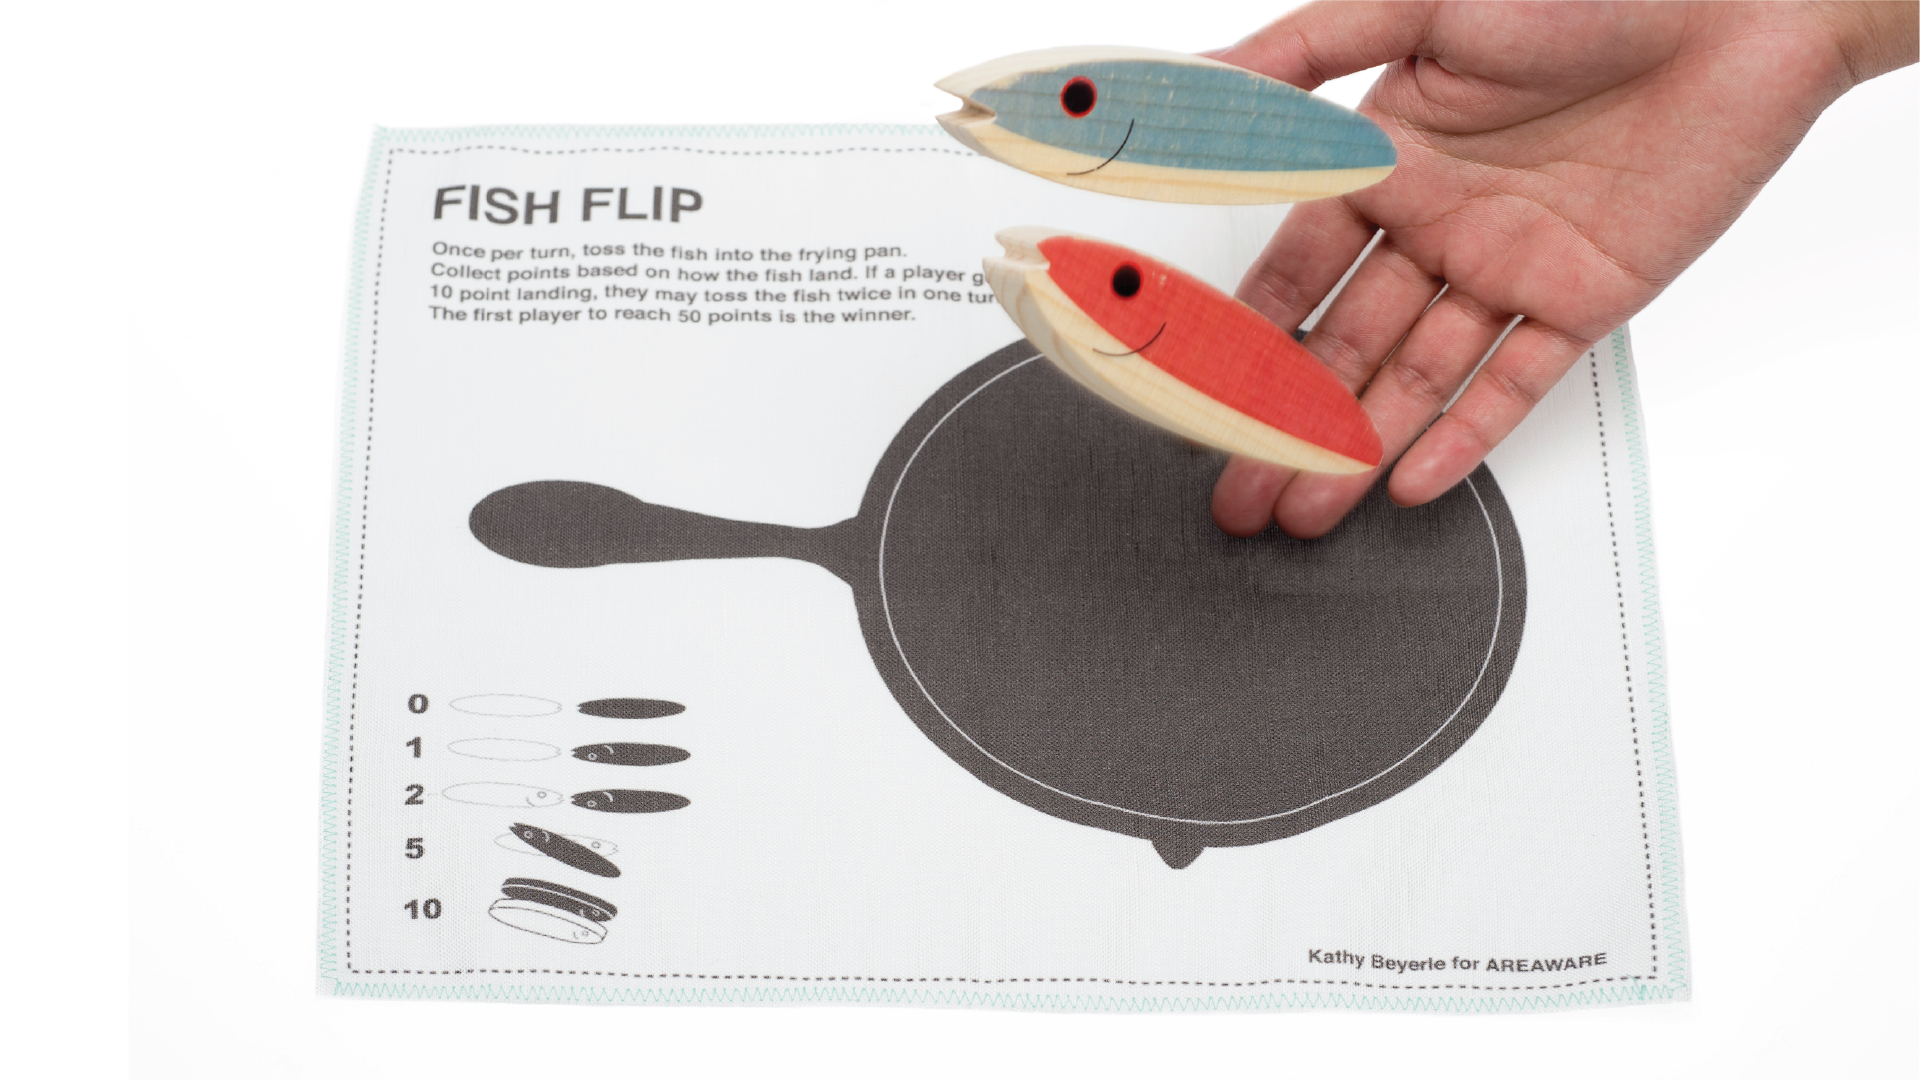 Hand placing 2 wooden toys in a fish shape on the top of the cloth play set.